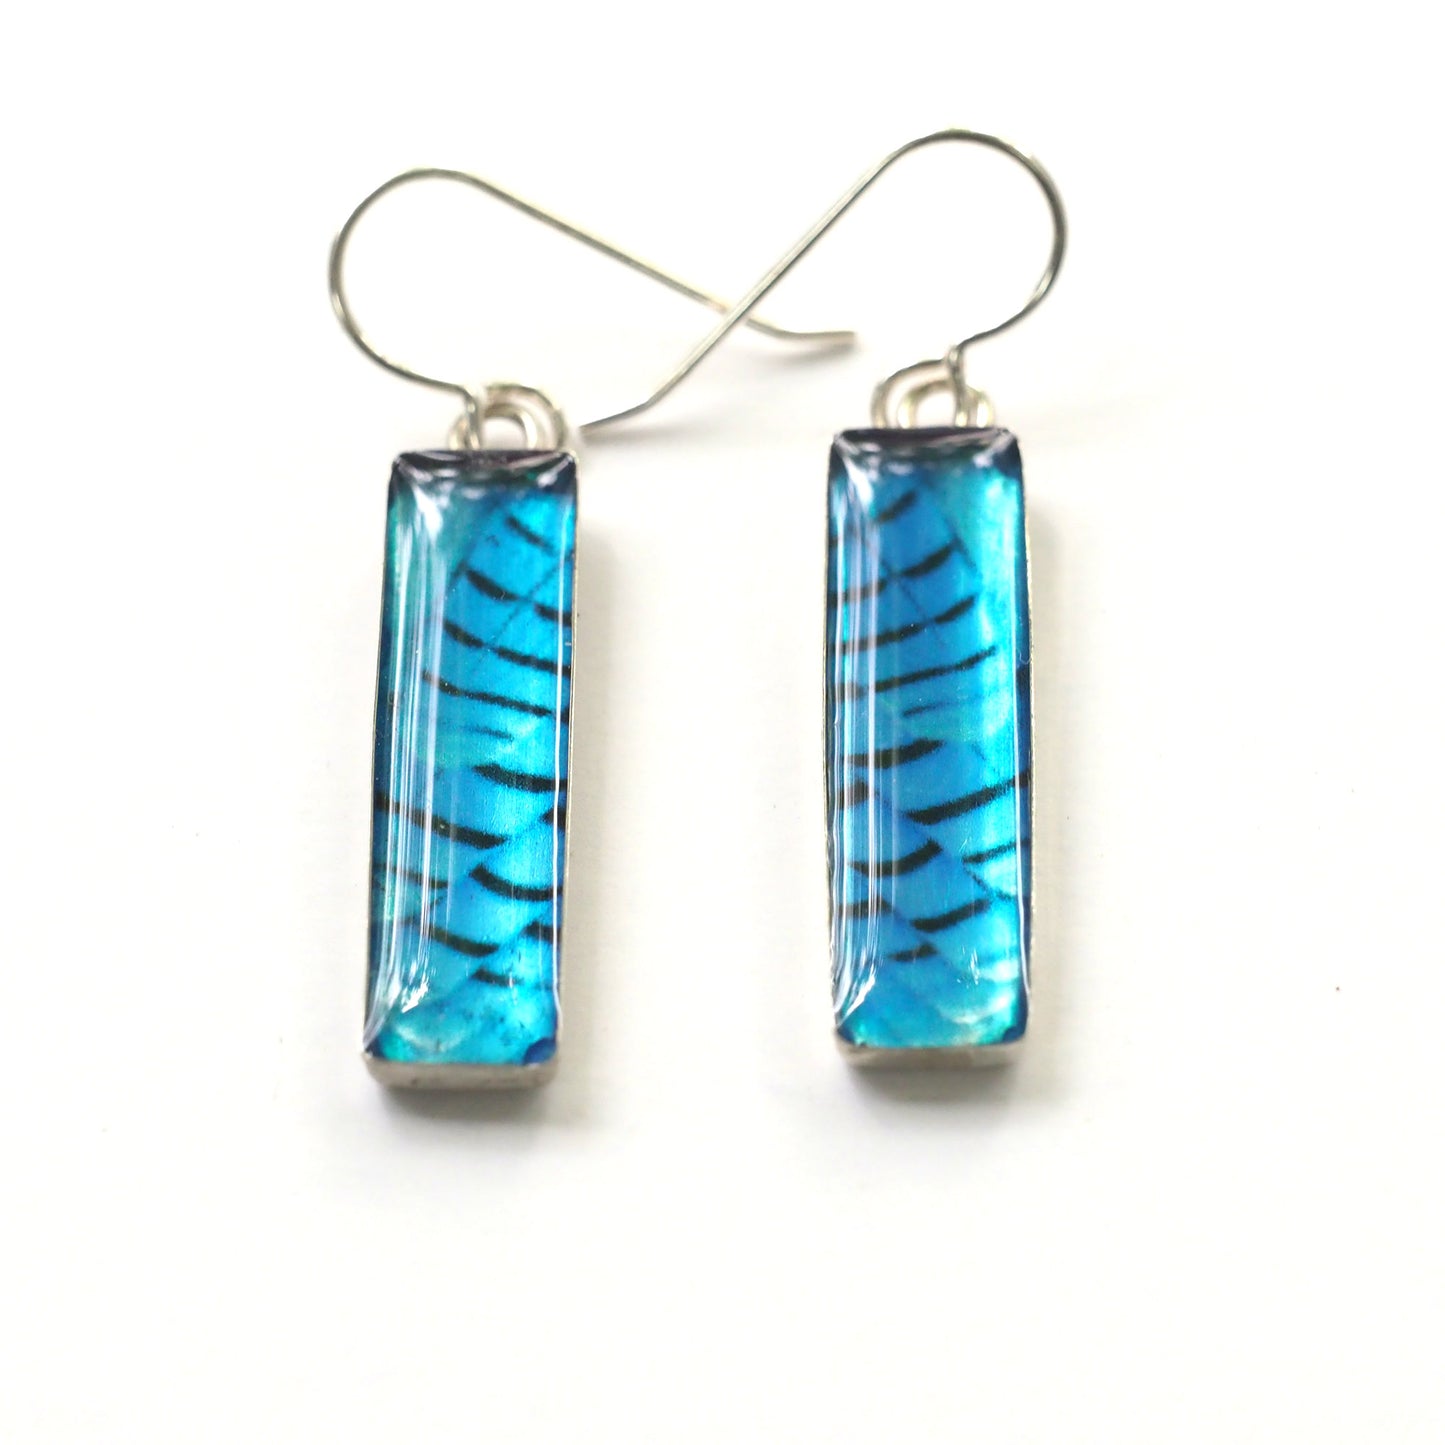 STELLER'S JAY FEATHERS - Rectangular Earrings, Silver and Resin